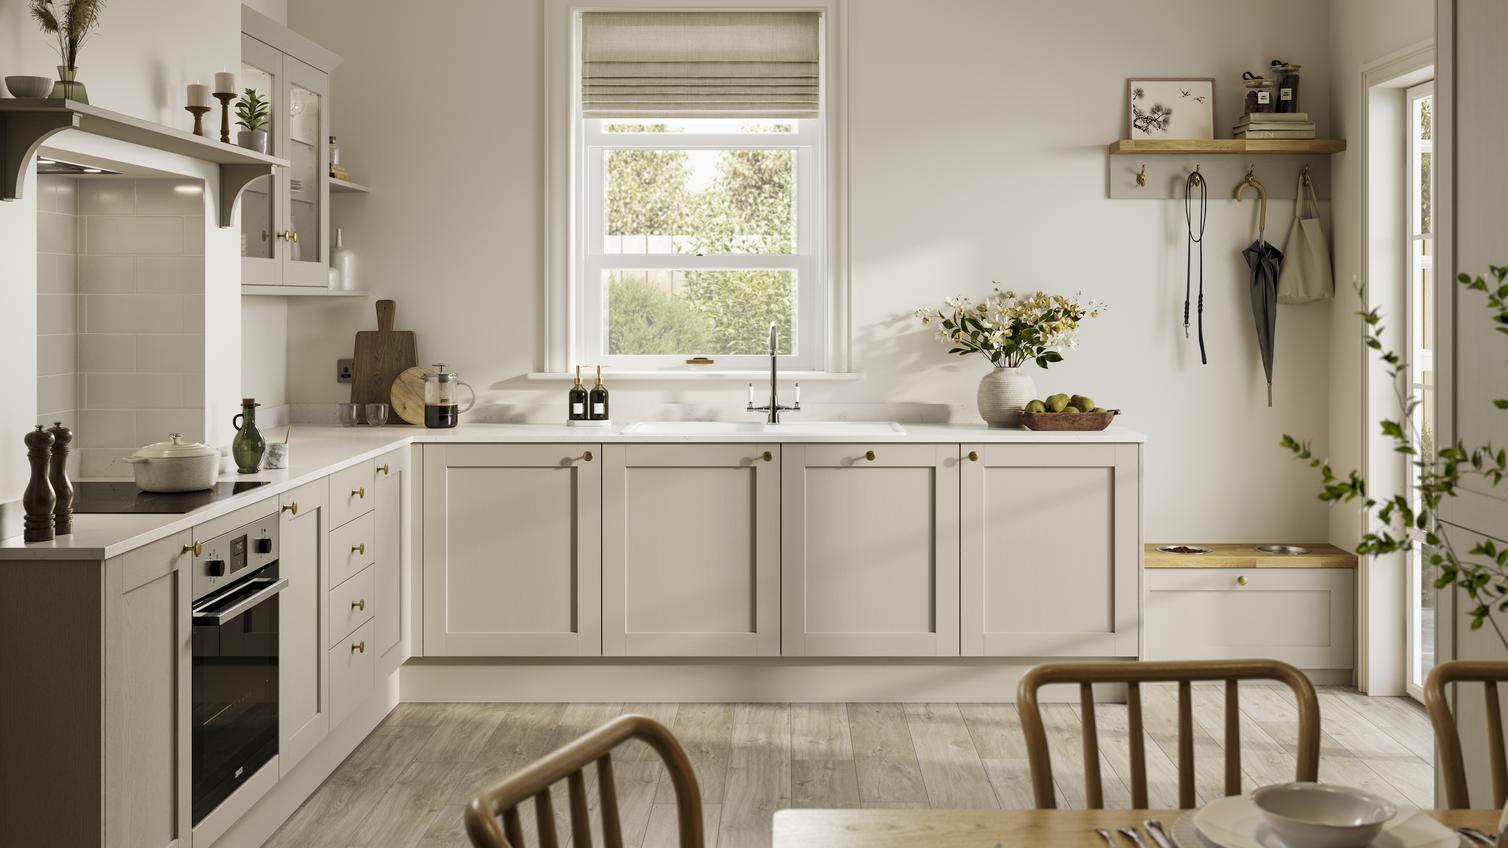 L-shaped, shaker kitchen in a cream, pebble colour. From the Halesworth range. Features white worktops and oak flooring